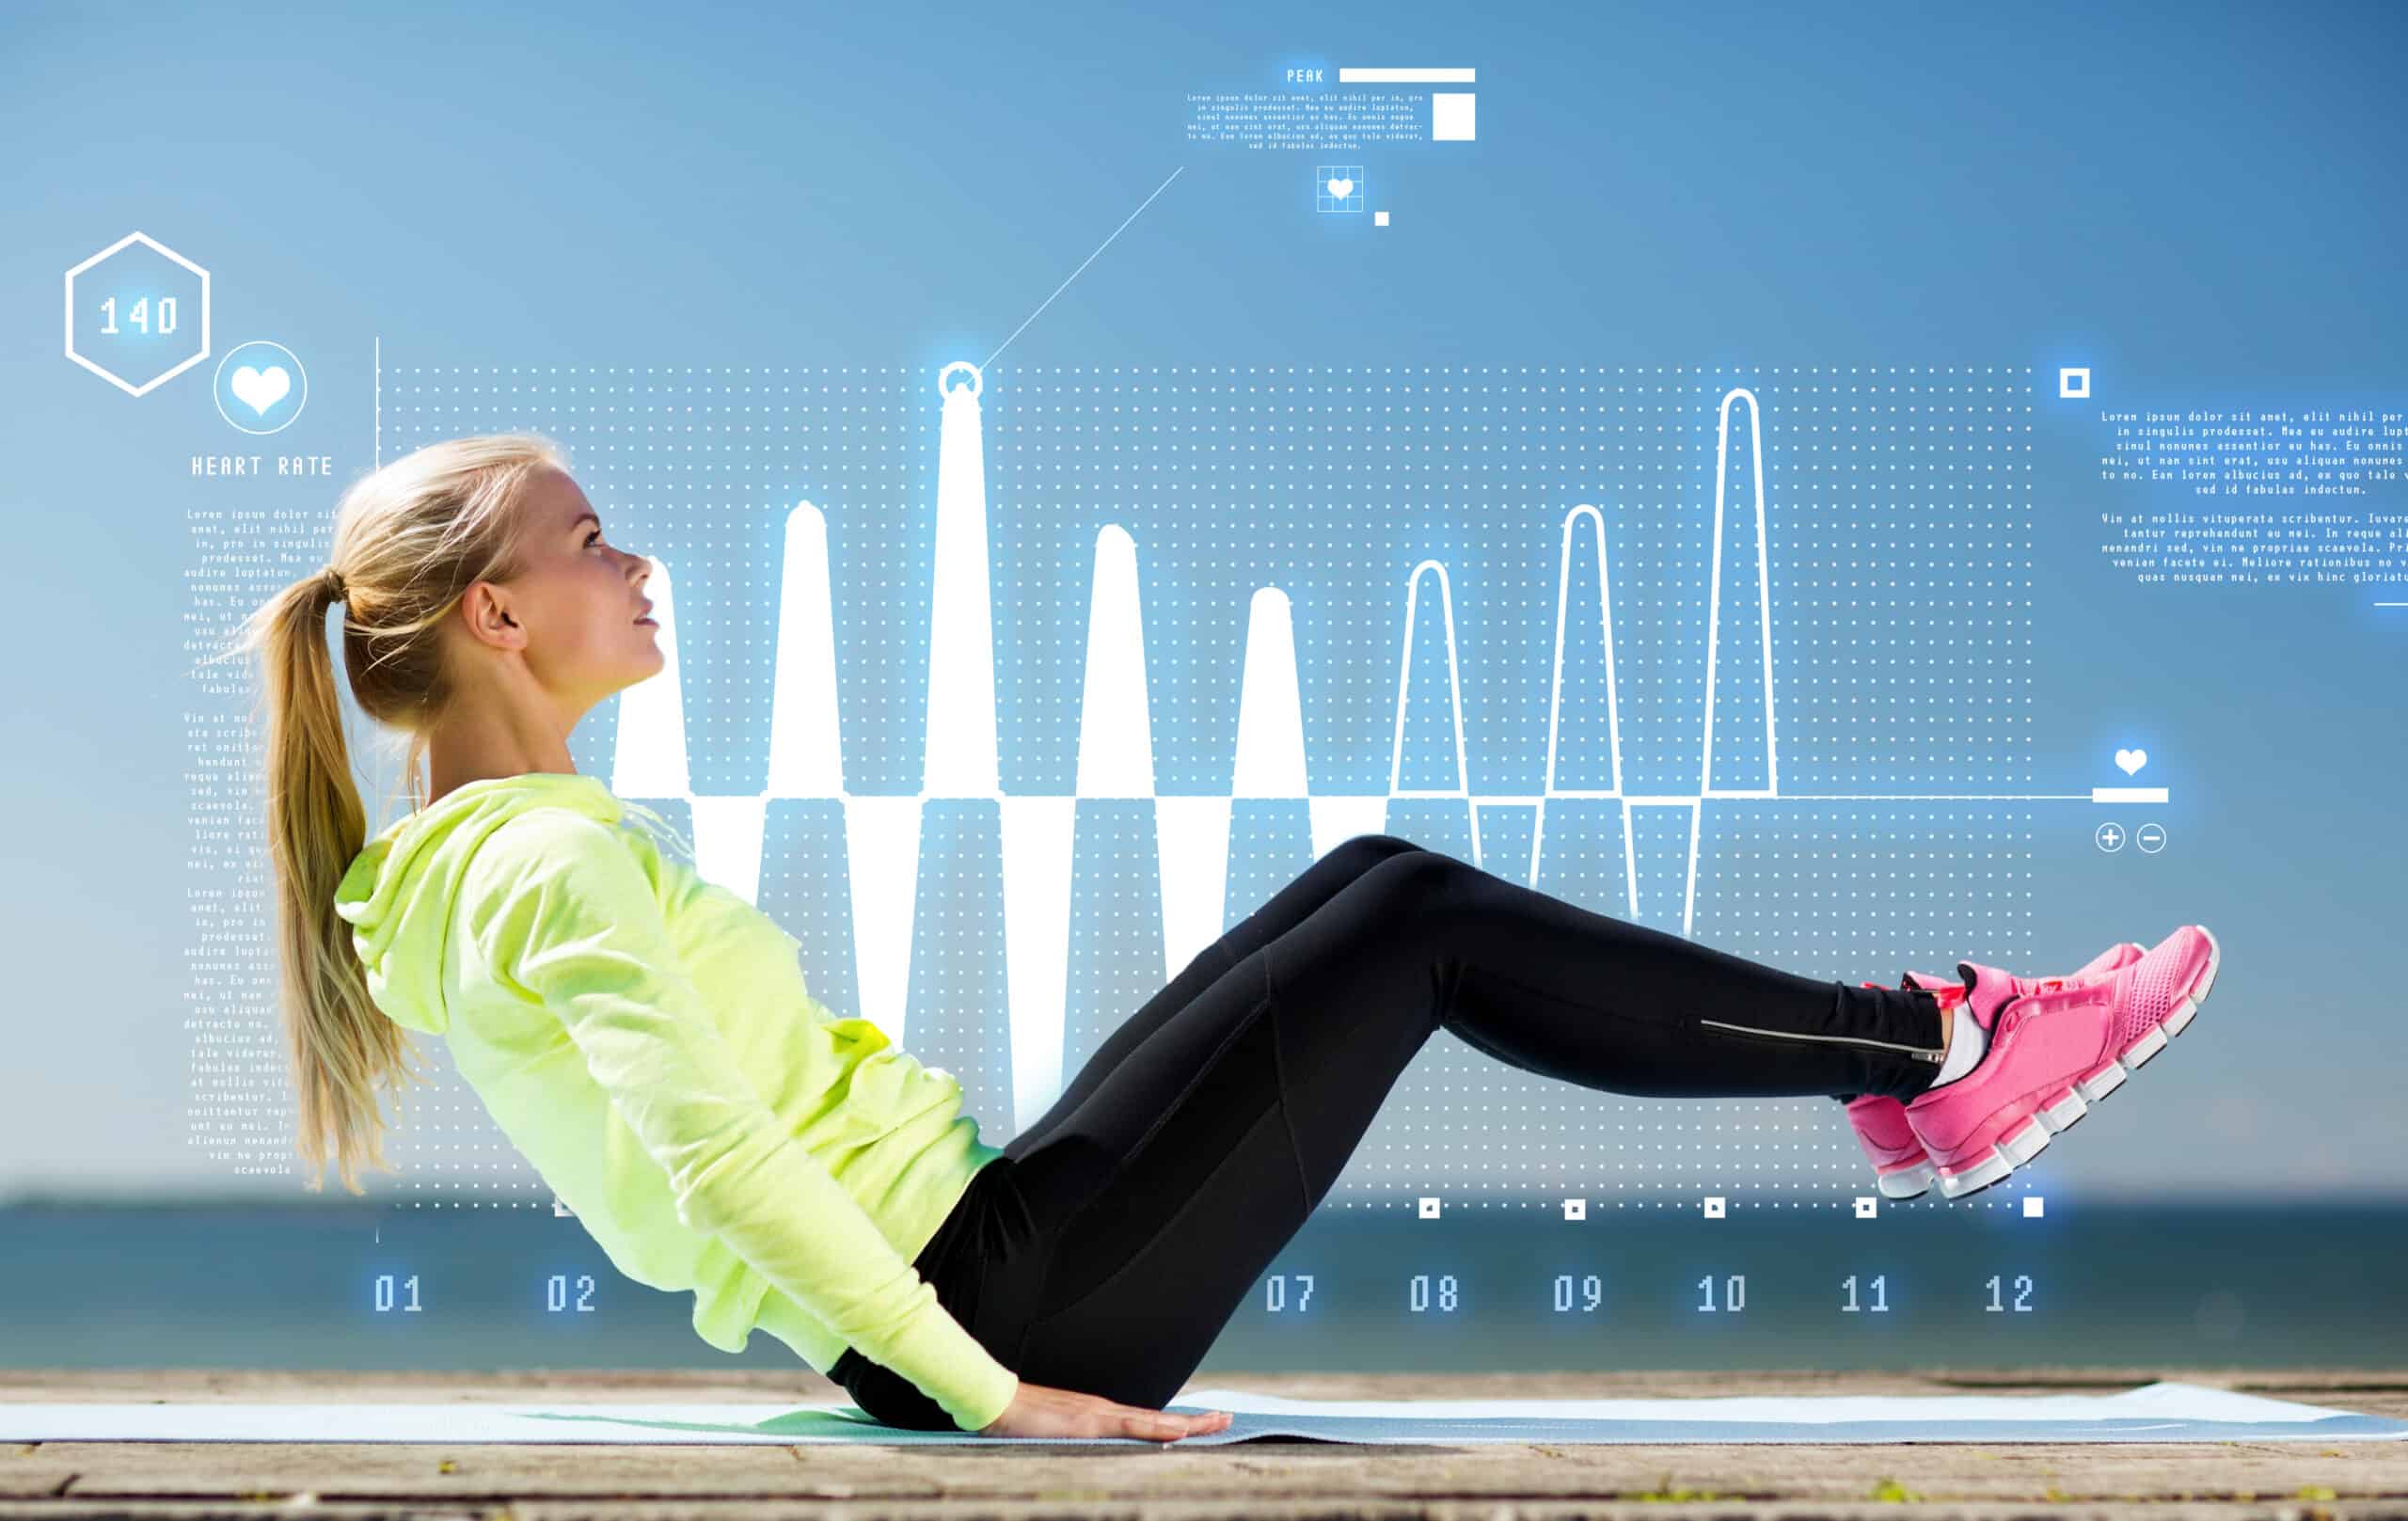 How Does Heart Rate Affect Performance and Recovery?